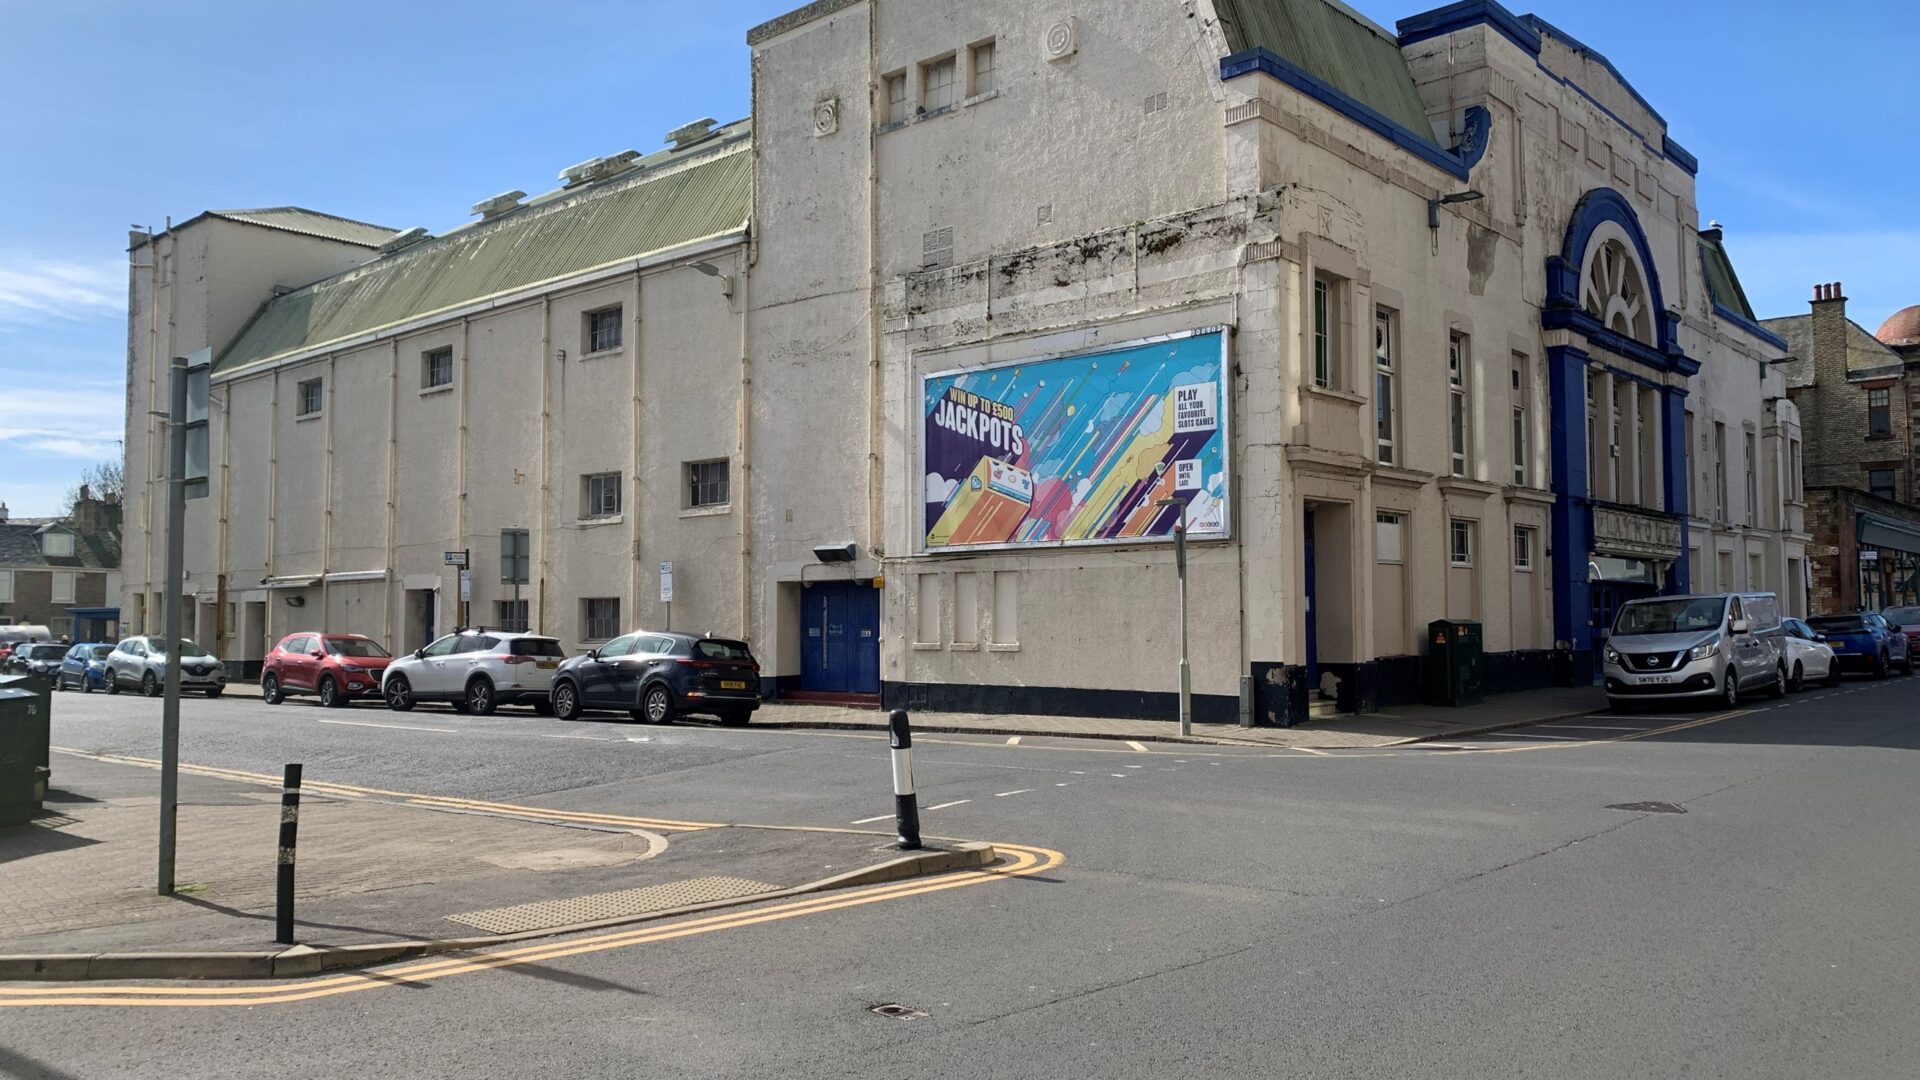 Eyes down for a full house as Shepherd markets former cinema and bingo hall in Ayr as development opportunity